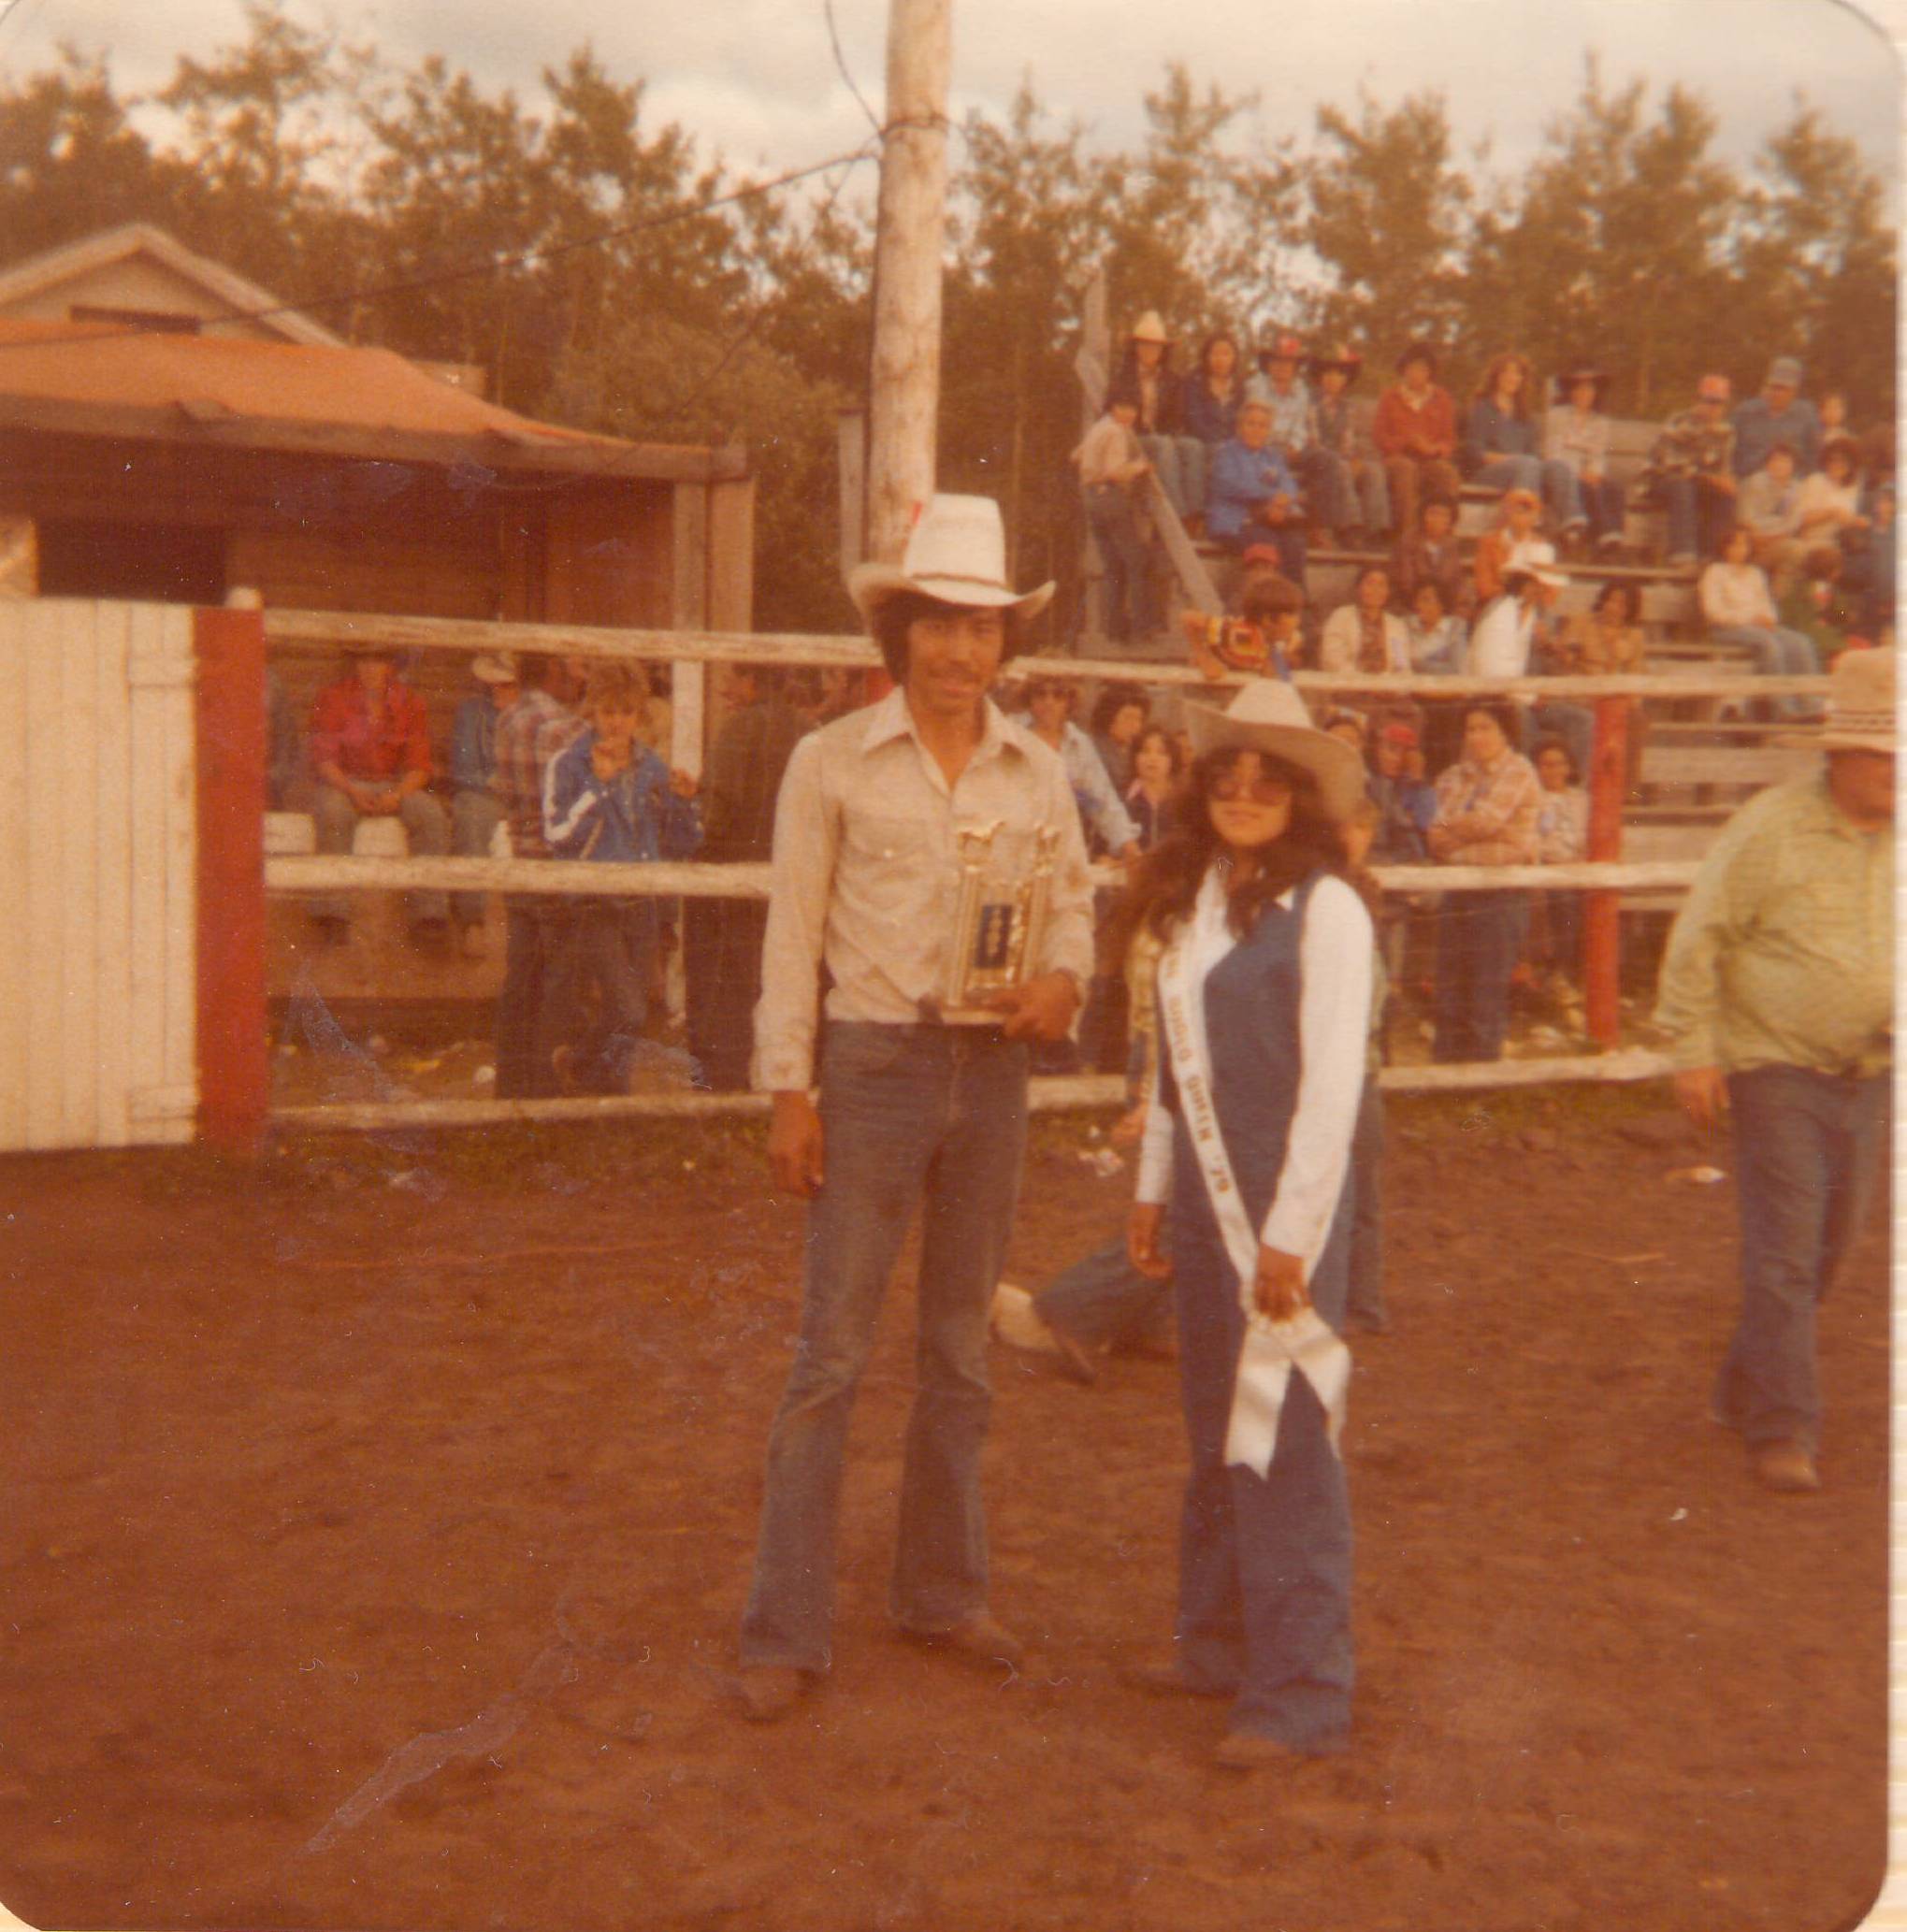 Anyone remember who was rodeo queen in 1979? The lady on the right is wearing the rodeo queen sash from that year! We also are unsure of the gentleman on the right. It seems he has won a trophy that has horses on the top. Any leads are appreciated!
*update*
Thanks to our Facebook Friends we are able to identify the gentleman on the left as Clarence Fournier and the rodeo queen on the right as Sherry Kazonay

2019.24.264 / Lizotte, Maria